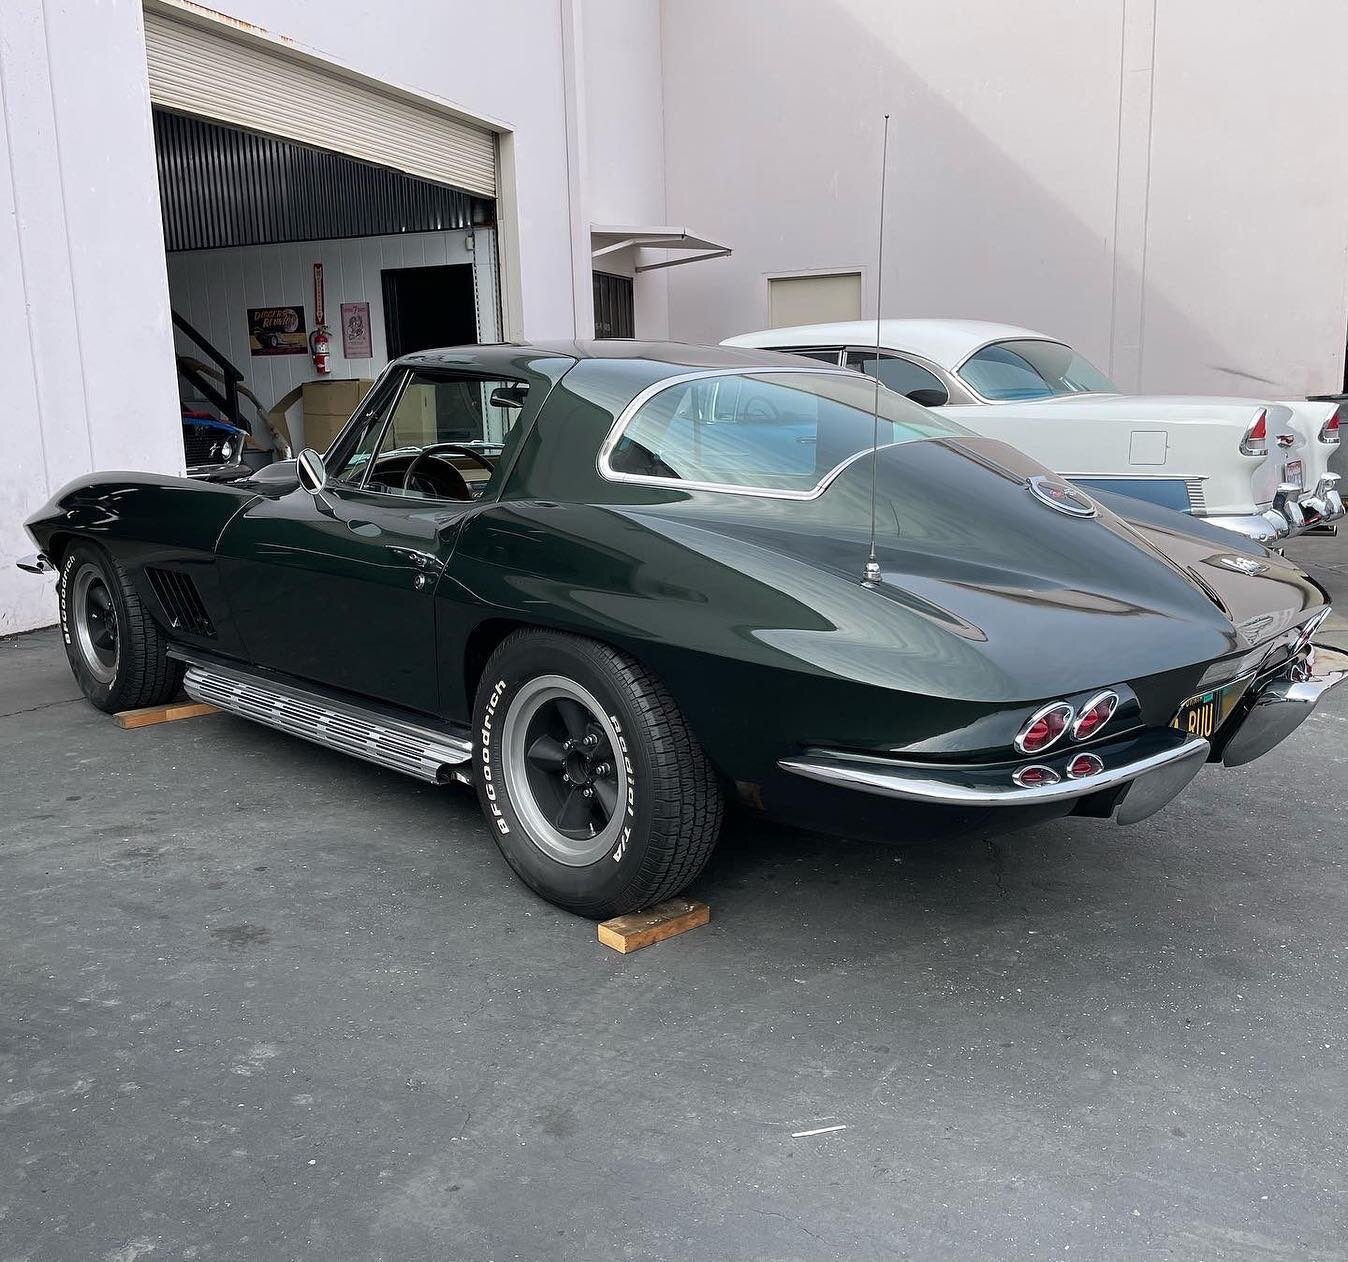 Haven&rsquo;t been posting much lately we&rsquo;ve been too busy! Brought this beauty of a vette out of mothballs recently